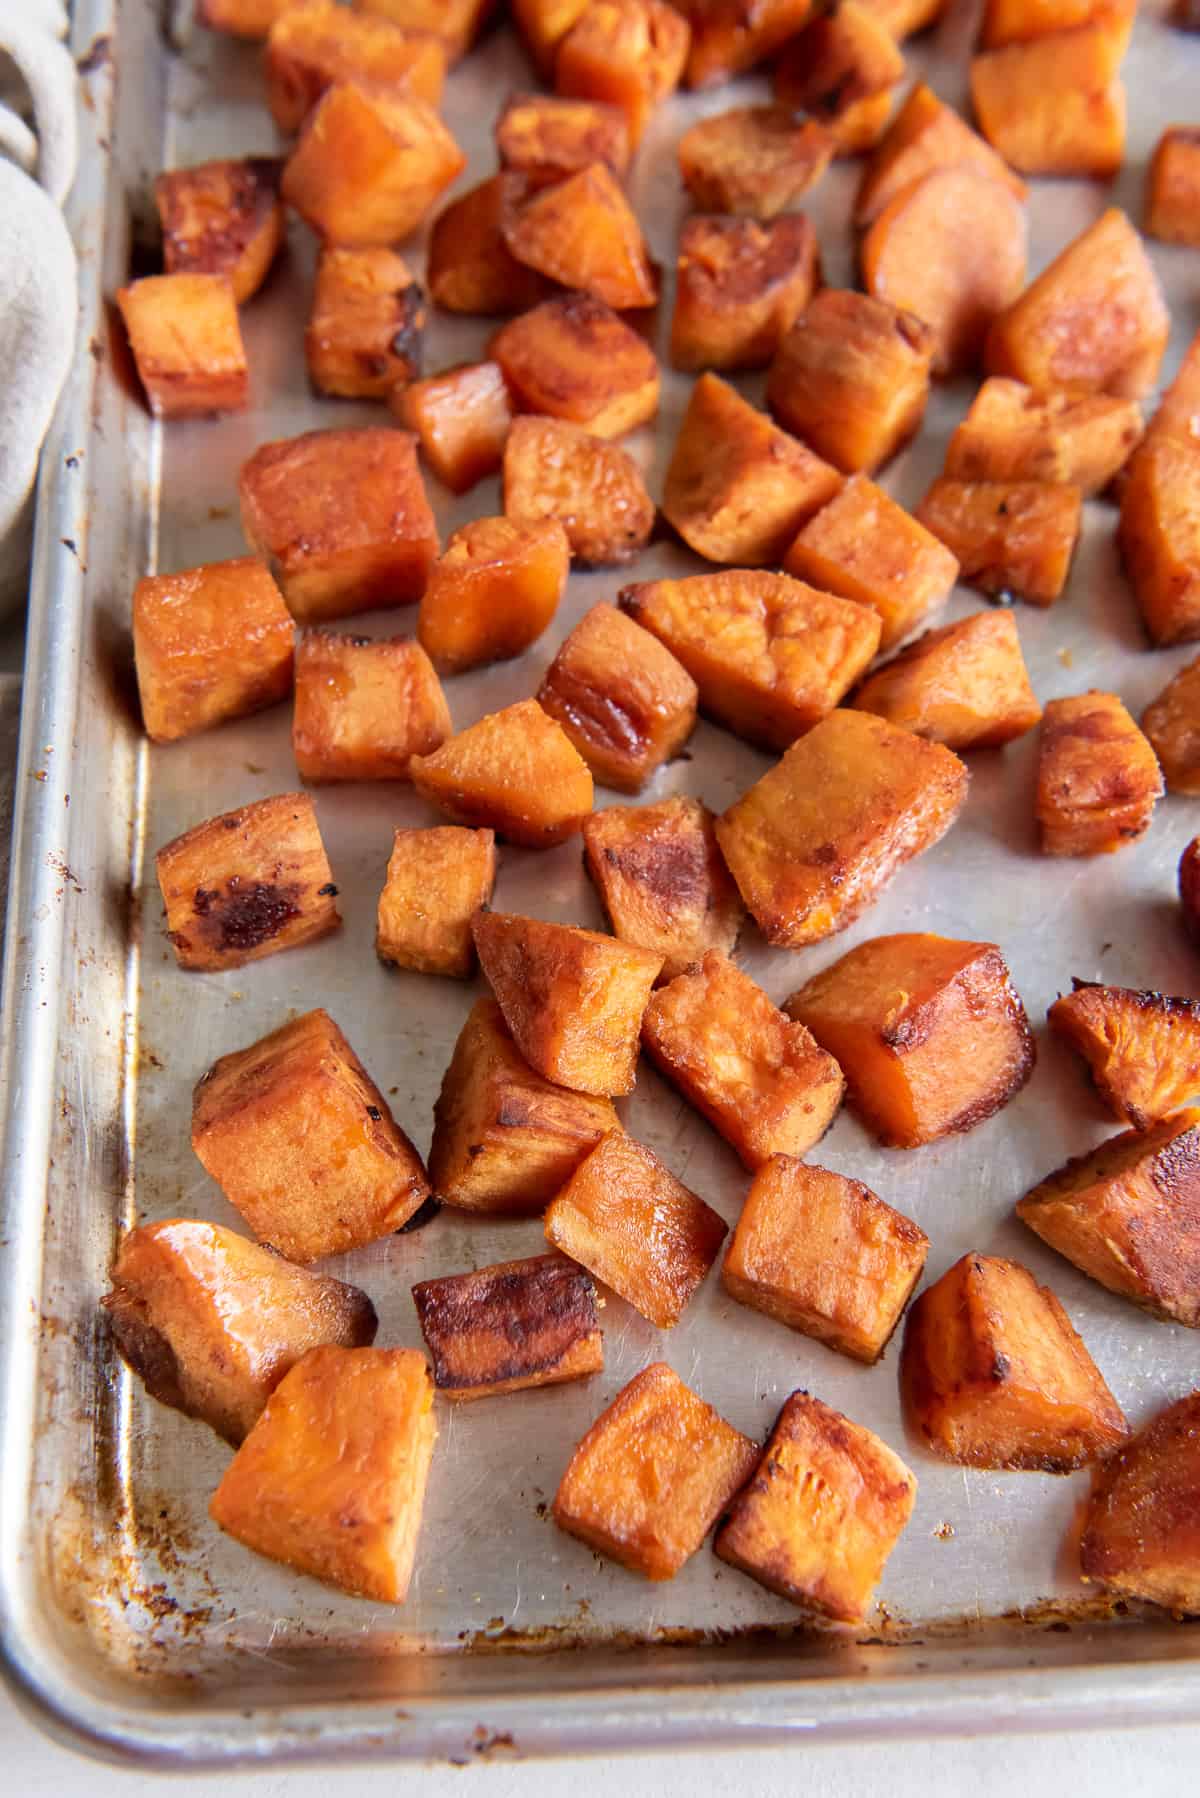 Roasted sweet potatoes spread out on a baking sheet.